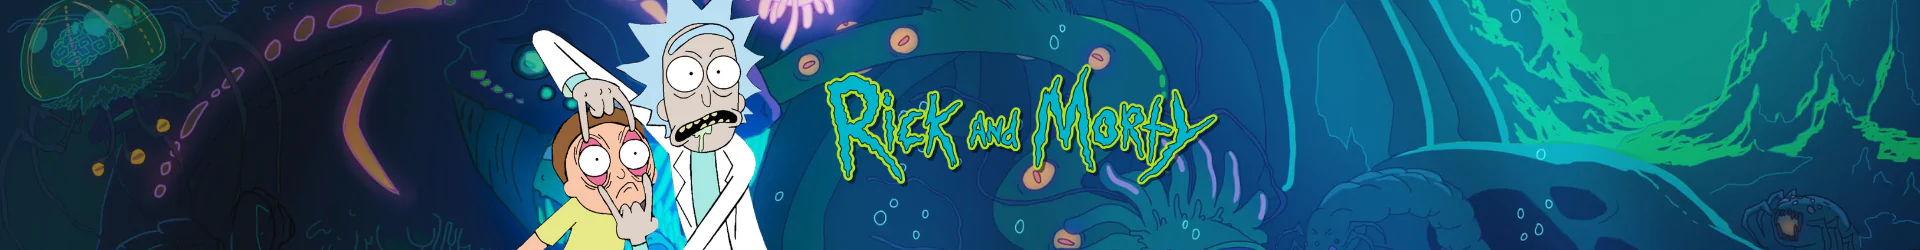 Rick and Morty t-shirts banner